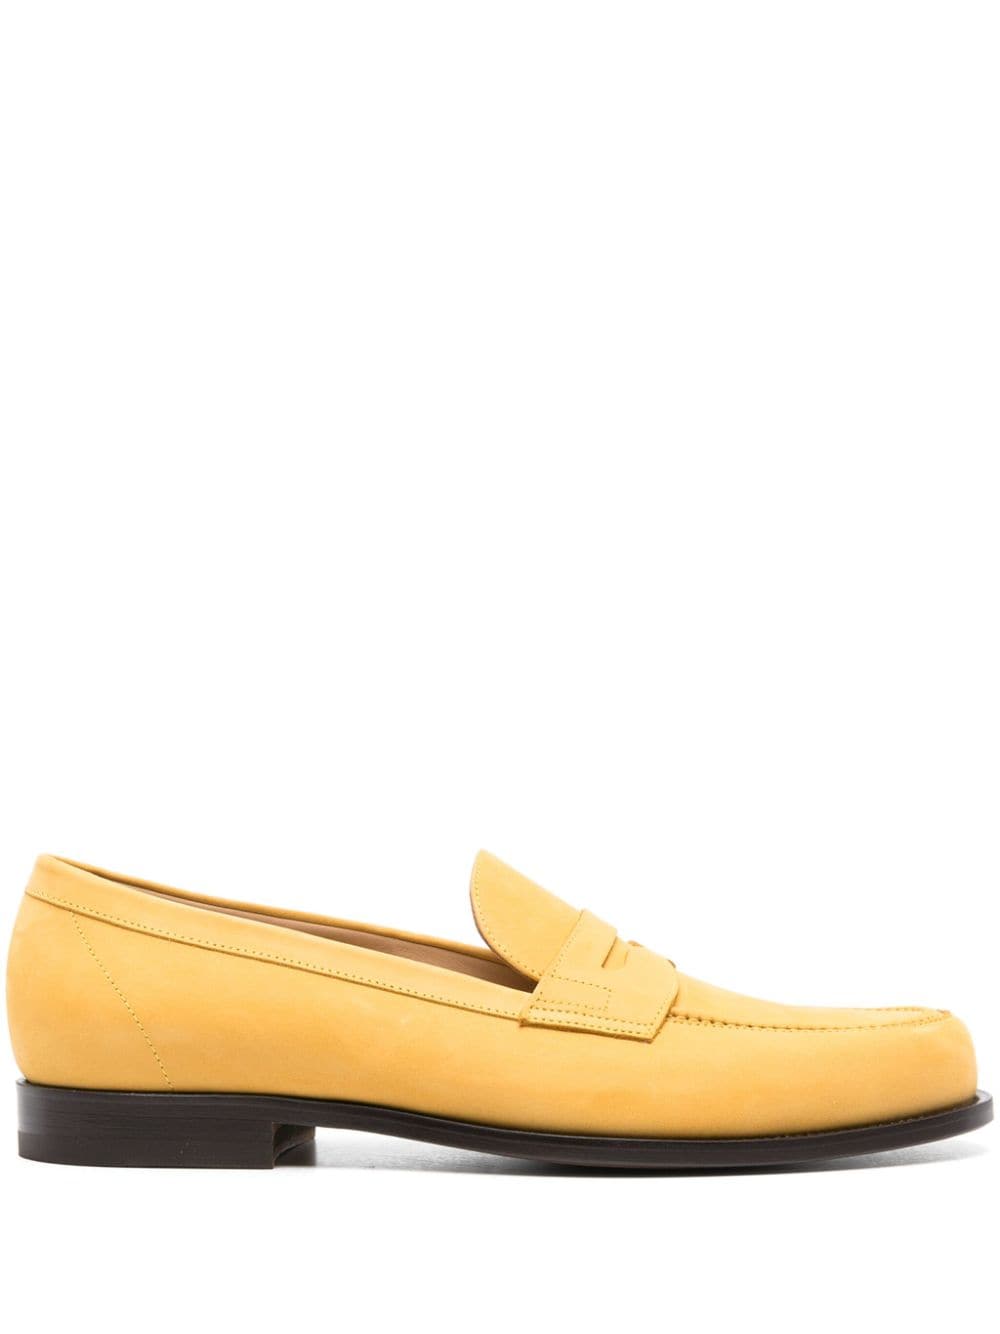 Austin leather loafers